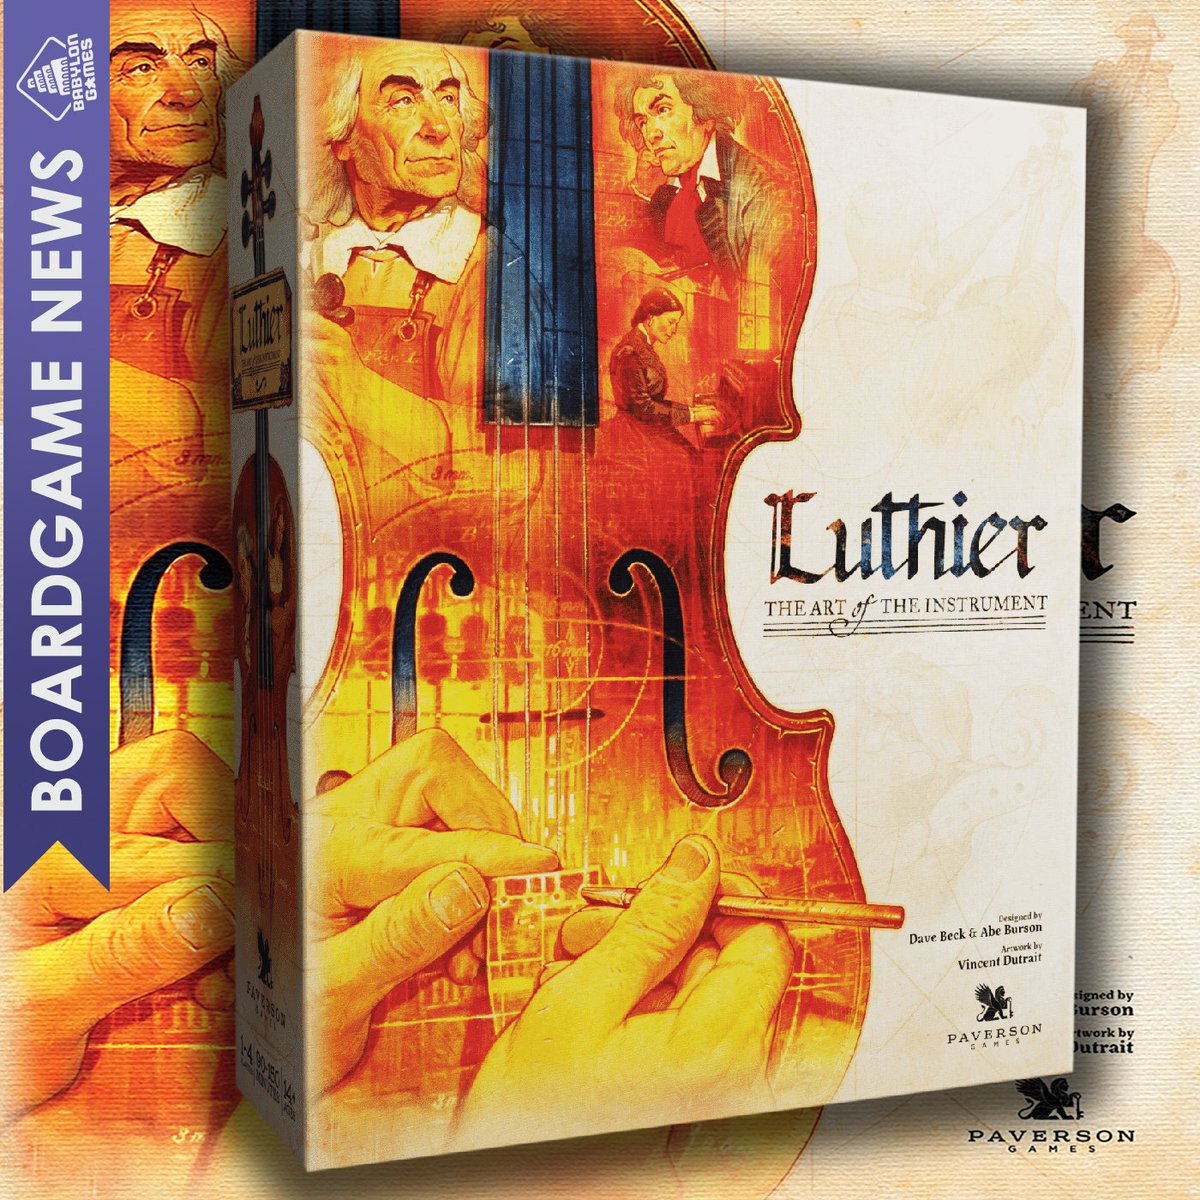 Luthier by @paverson 

📐: Dave Beck, Abe Burson
🎨: Vincent Dutrait
🧍: 1-4 players
⏱️: 60-120 min

boardgamegeek.com/boardgame/3713…

#boardgames #juegodemesa #geek #meeple #brettspiele #game #graplanszowa #jeuxdesociete #boardgame #ボードゲーム